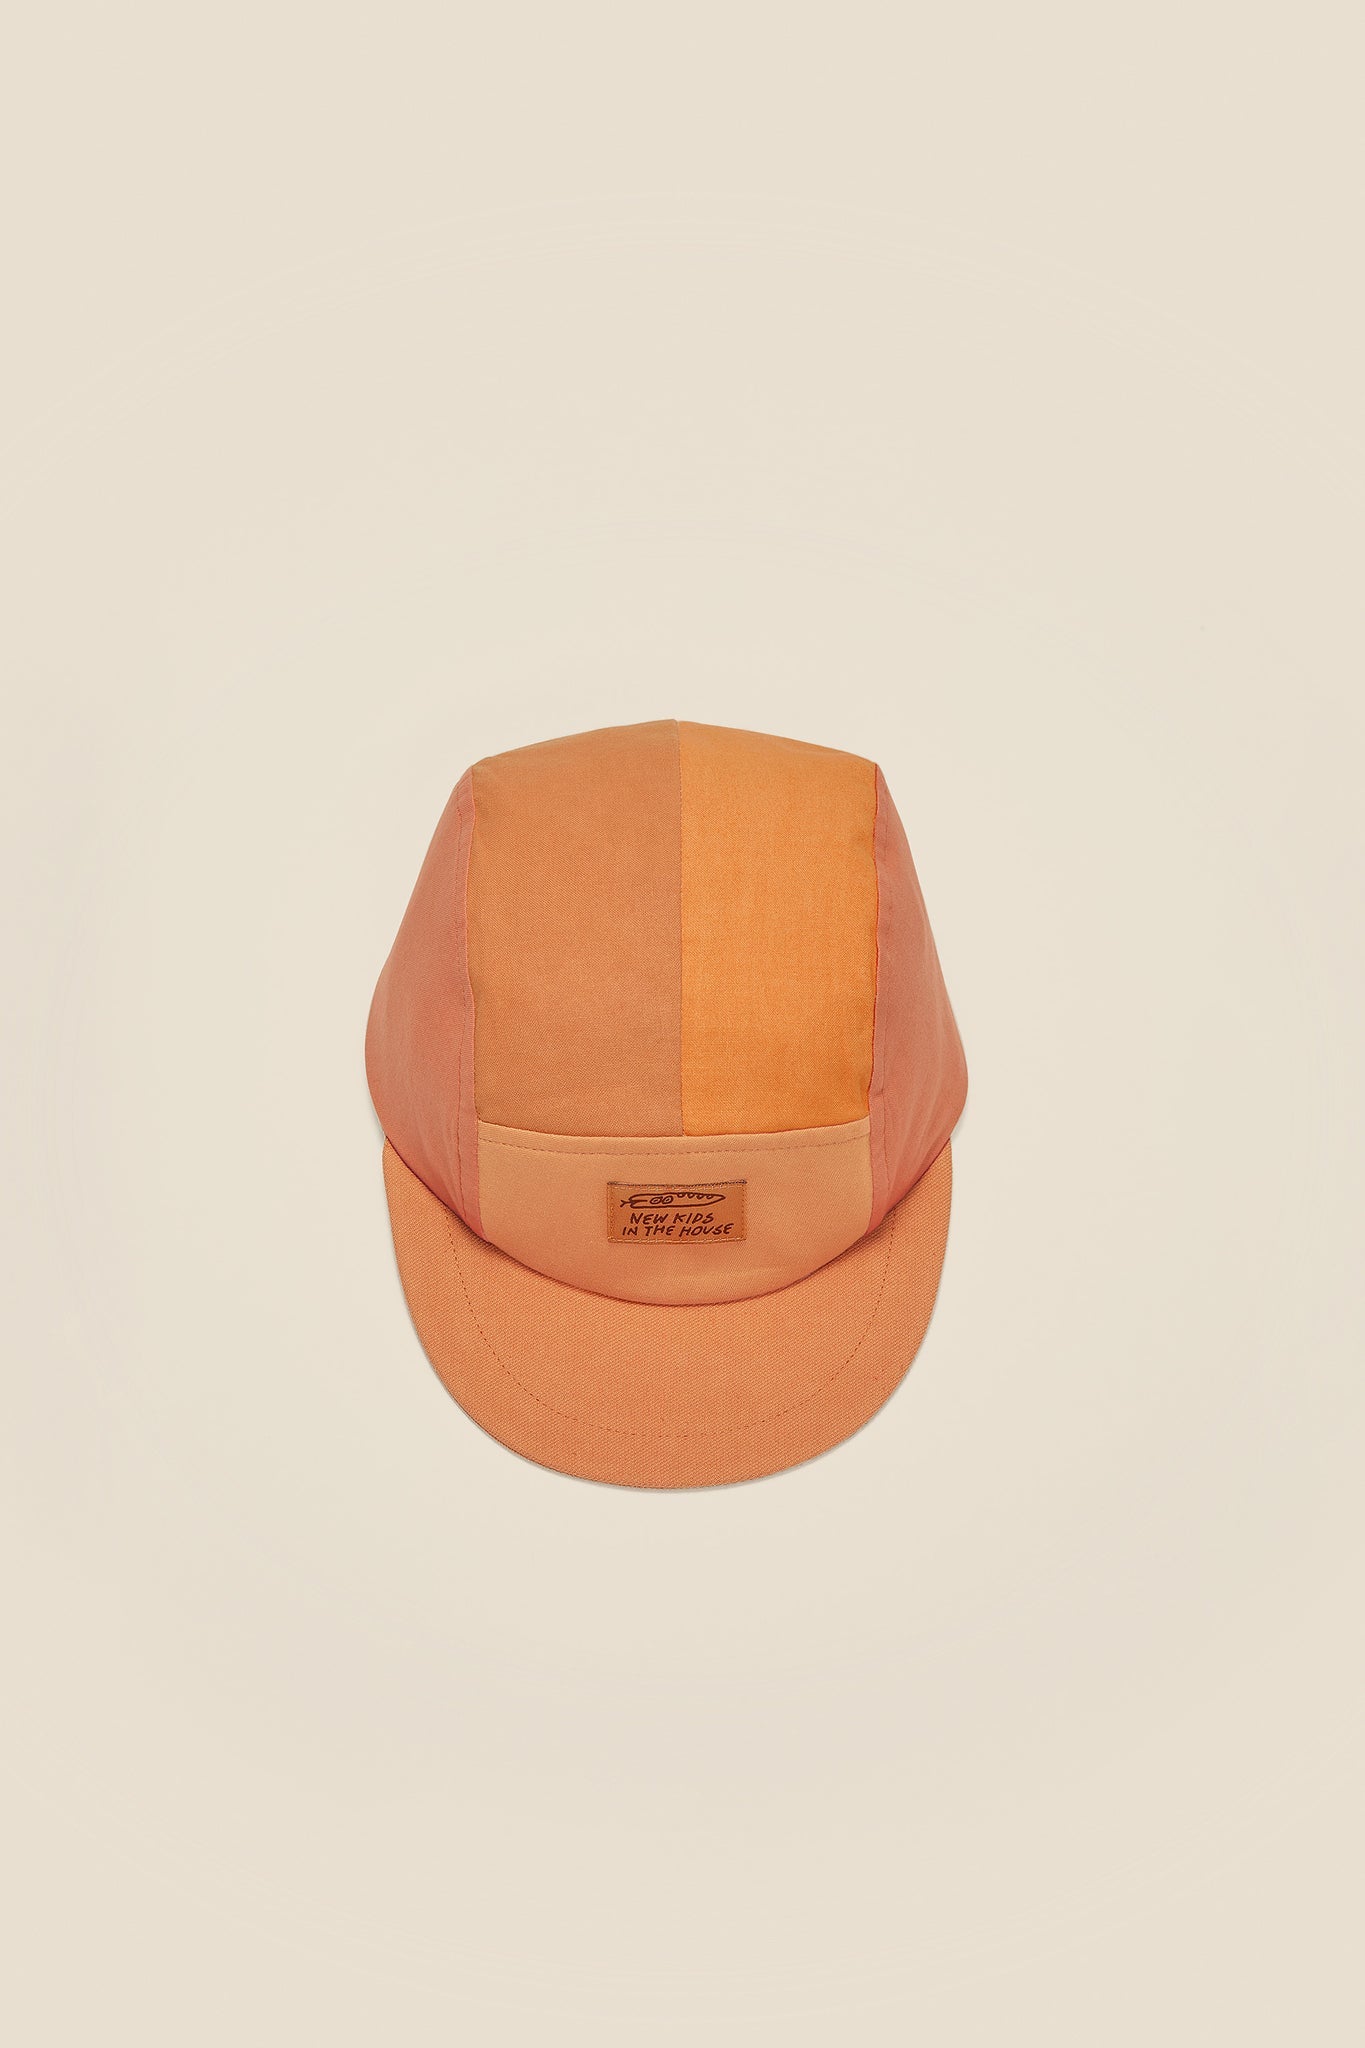 Calvin is a 5-panel cap for kids aged between 2 and 6. It is adjustable, so it grows with your kid. Made from pre-used bedlinen, with cotton lining & soft visor. - Made in Germany